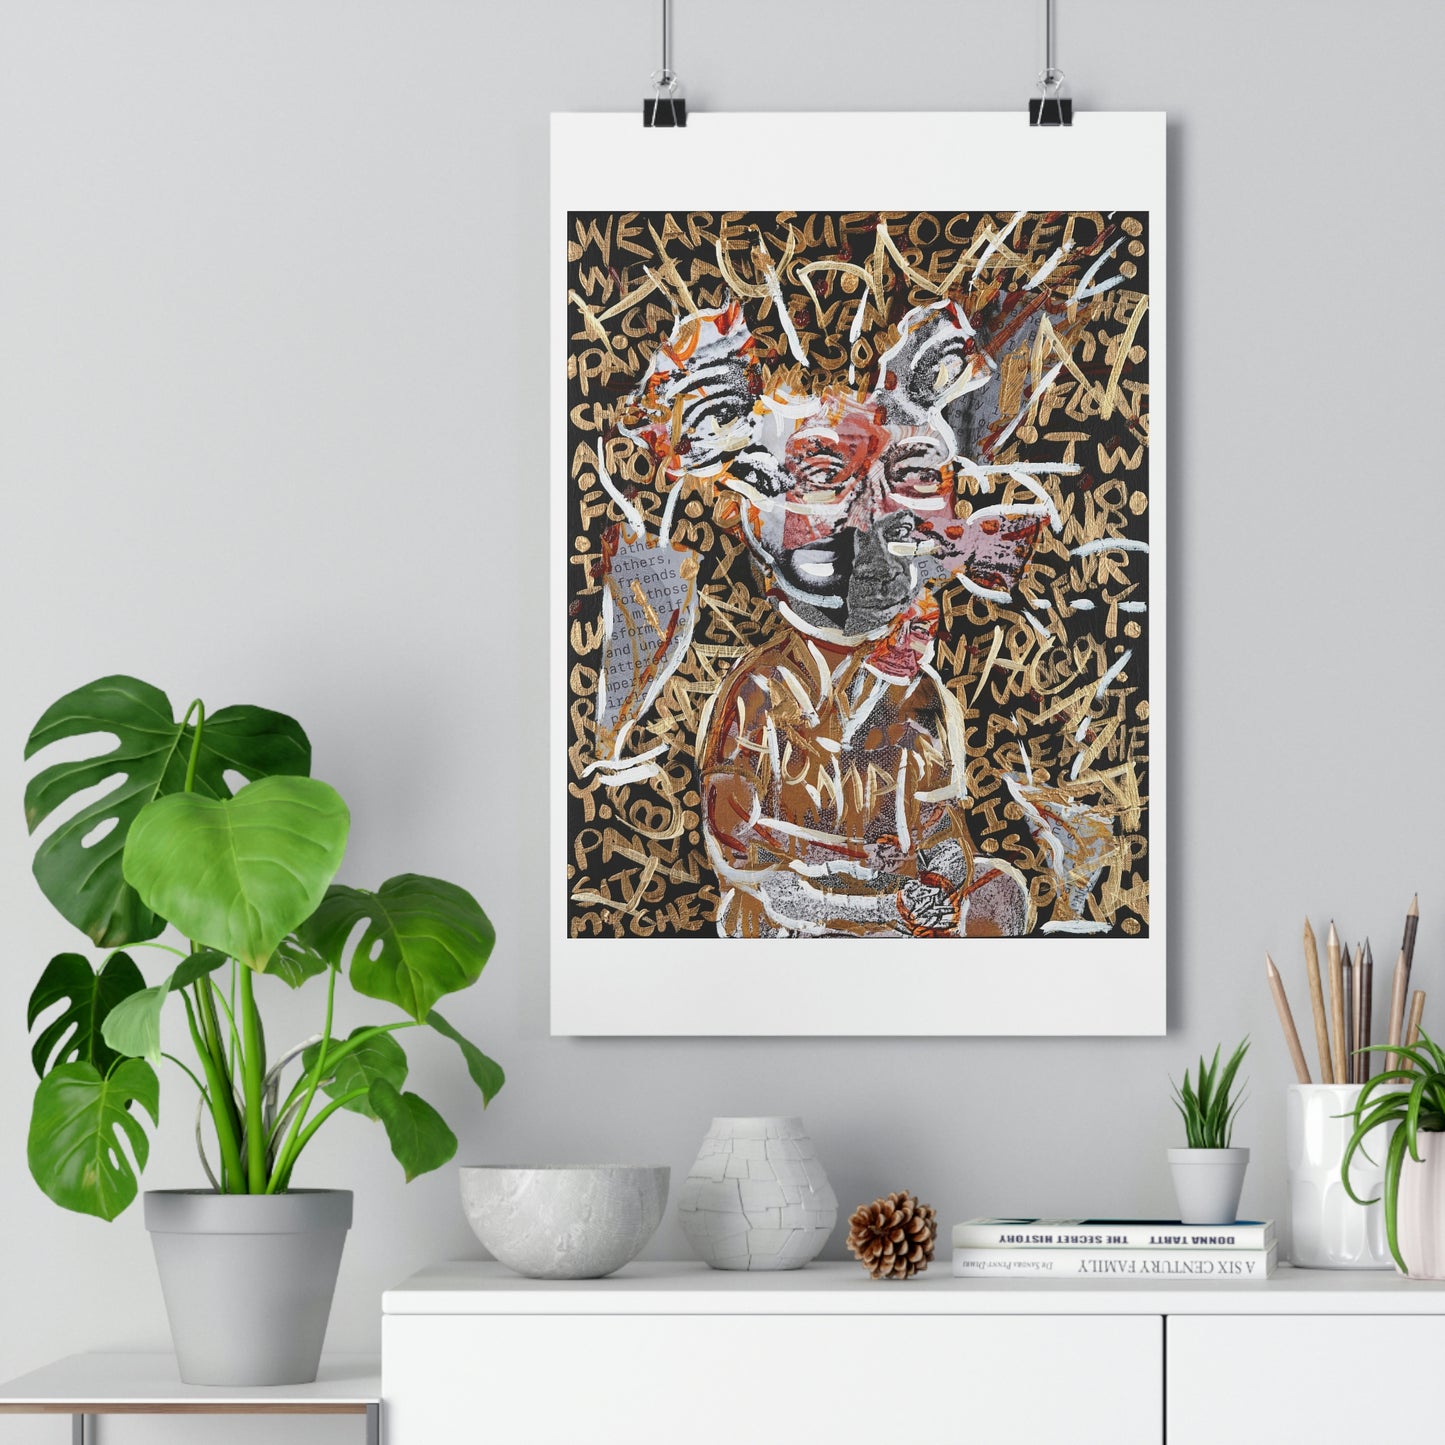 Worry. Anger. Systemic. Pandemic. Giclée Art Print